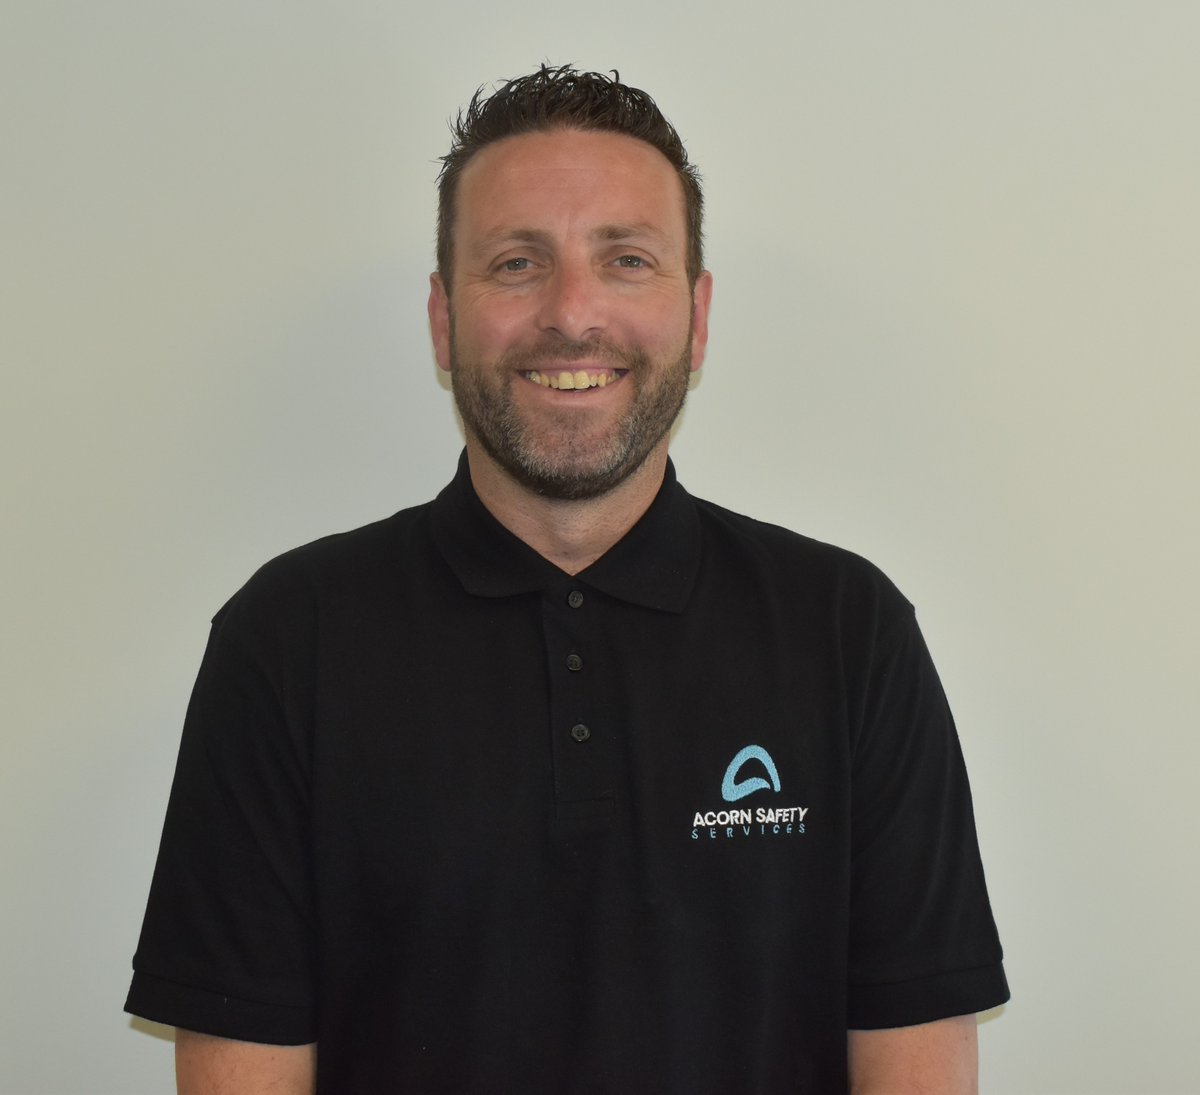 Introducing Legionella and Fire Consultant Adam Midson 👋 

Adam joined Acorn in June and has a wealth of experience in #healthandsafety specialising in legionella and fire #riskassessments.

If you need our help, get in touch at bit.ly/42jTTdr